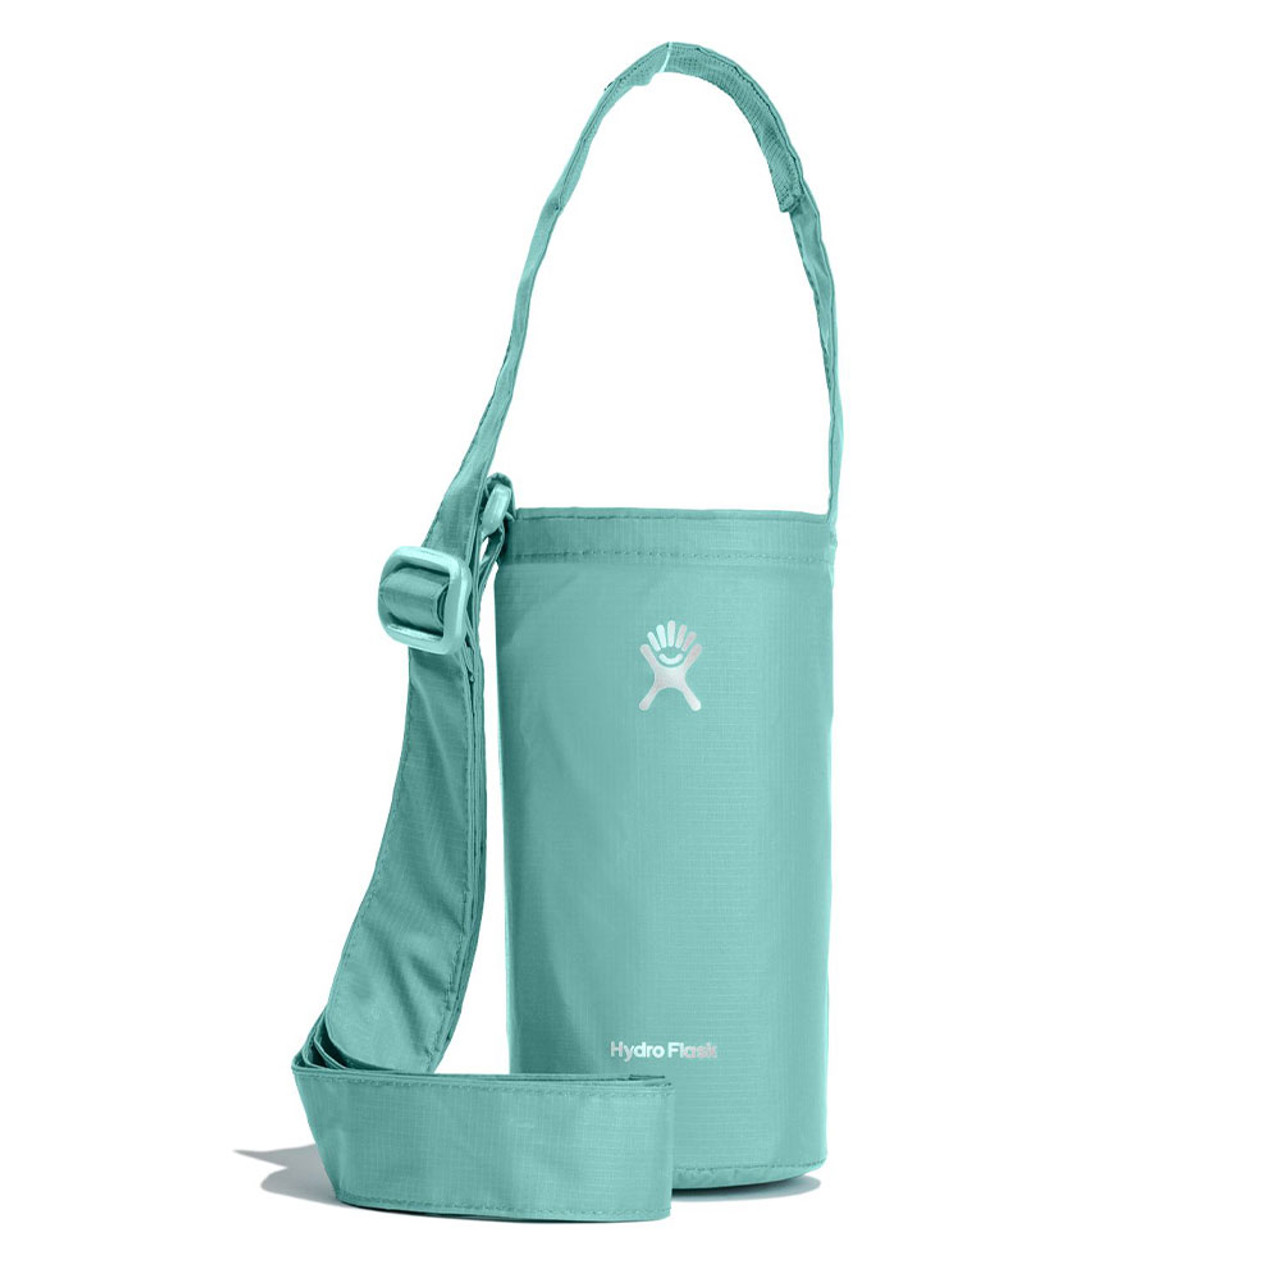 What is an XL Bogg Bag? - Eagle Eye Outfitters